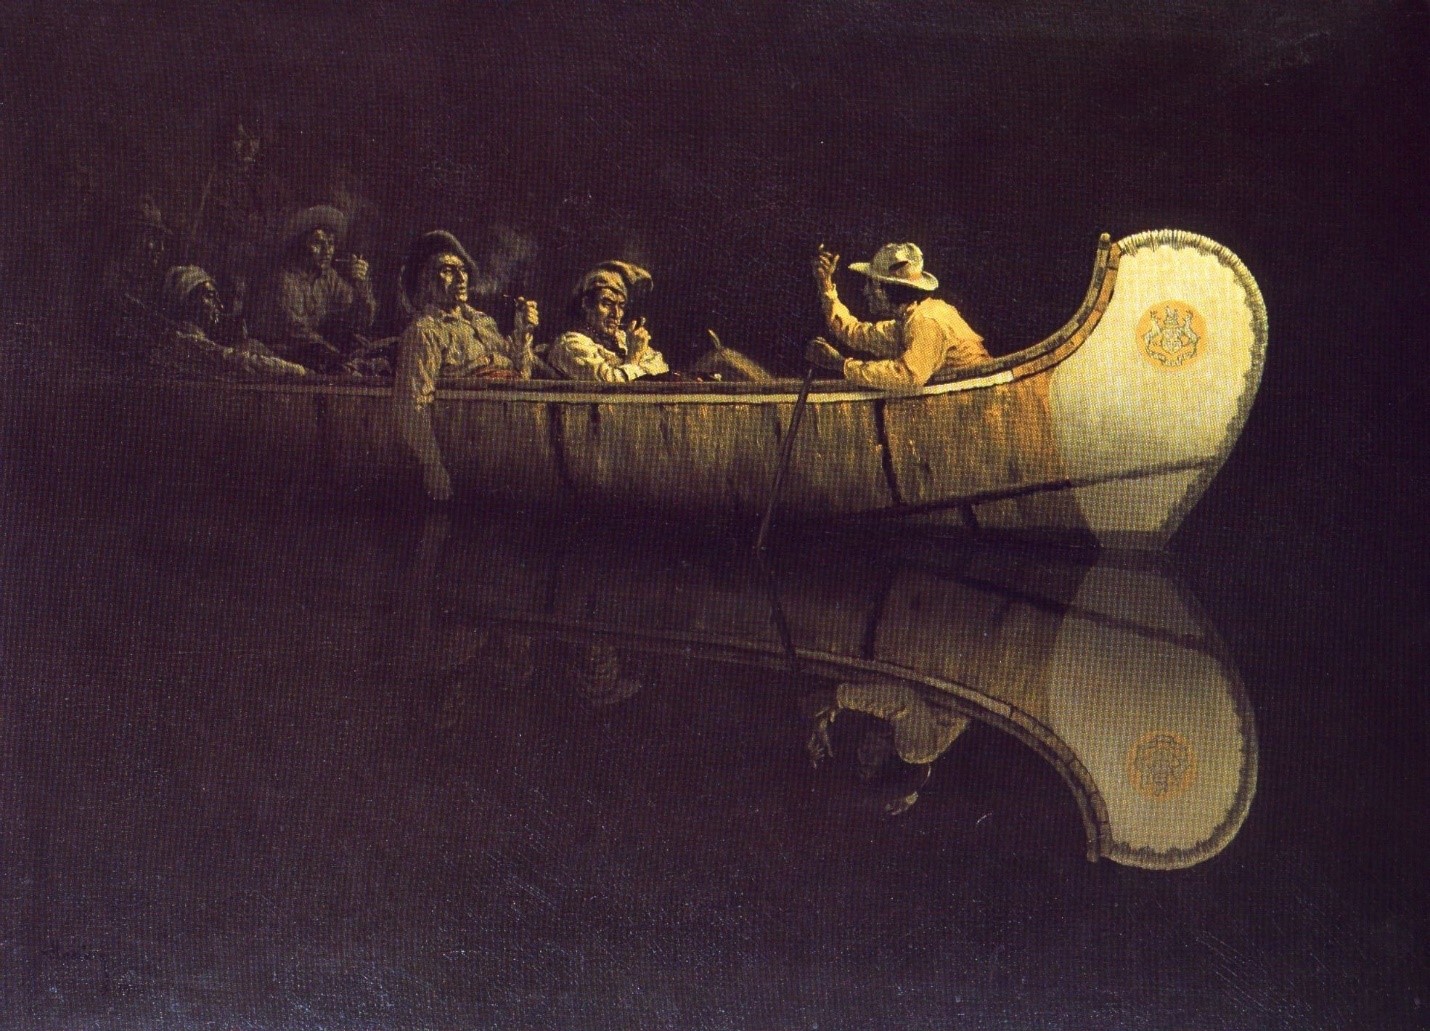 painting of voyageurs in canoe 